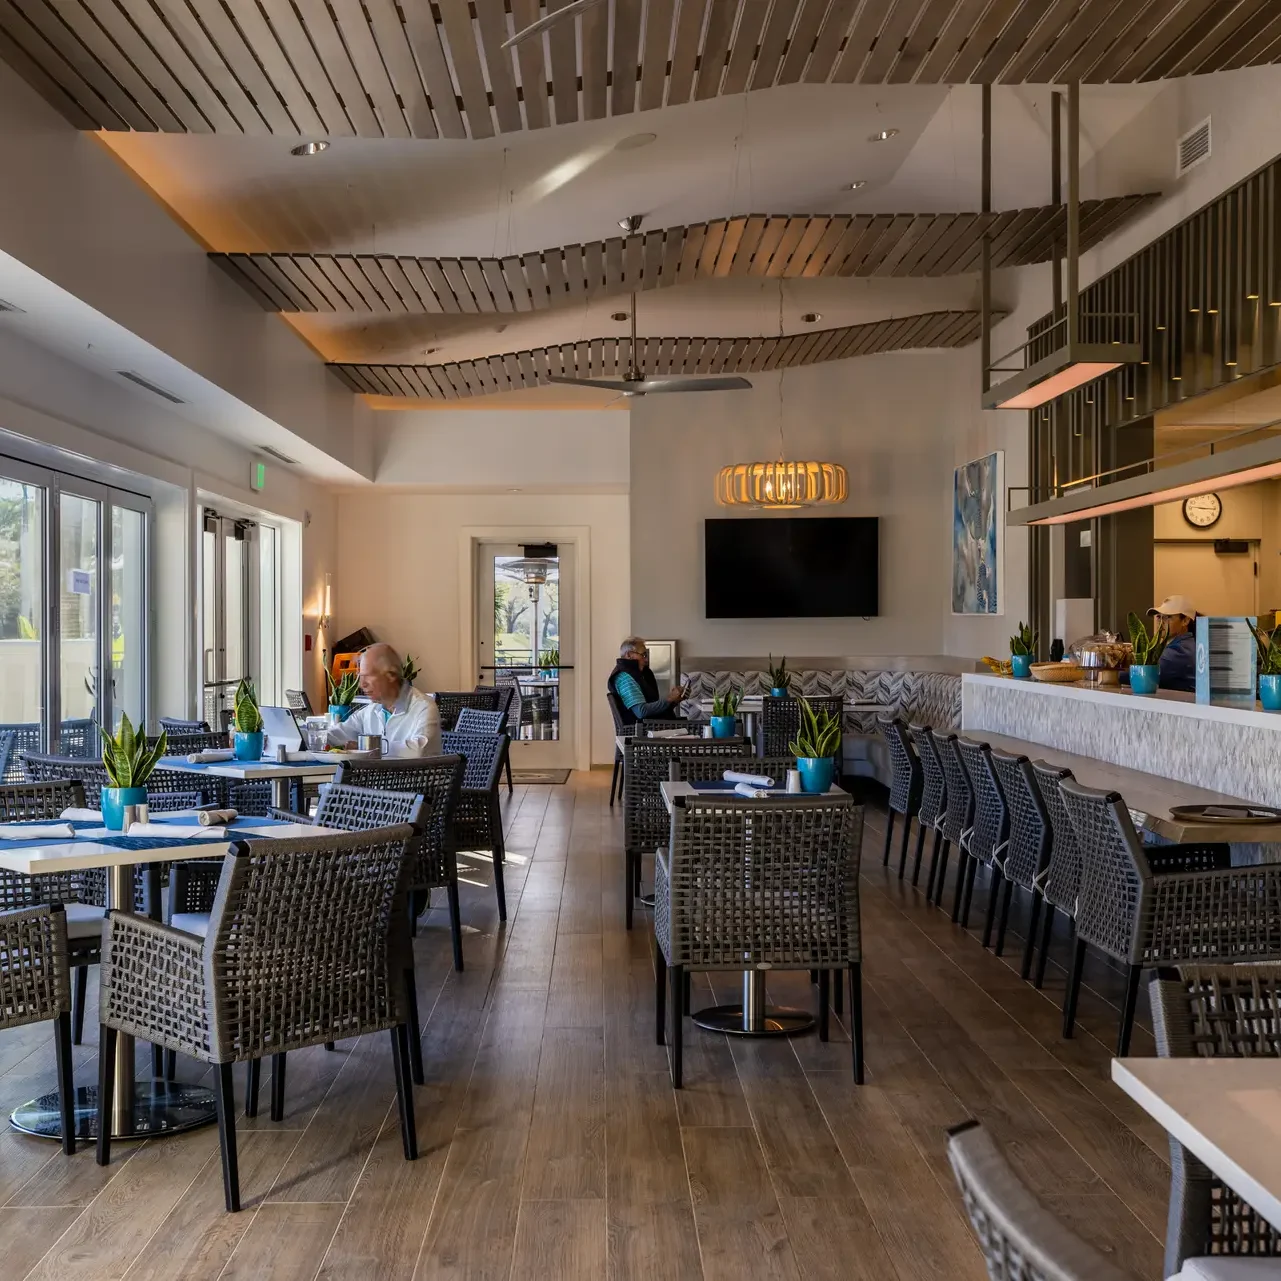 <a href="https://westbayclubhomes.com/lifestyle/dining">Dining</a>